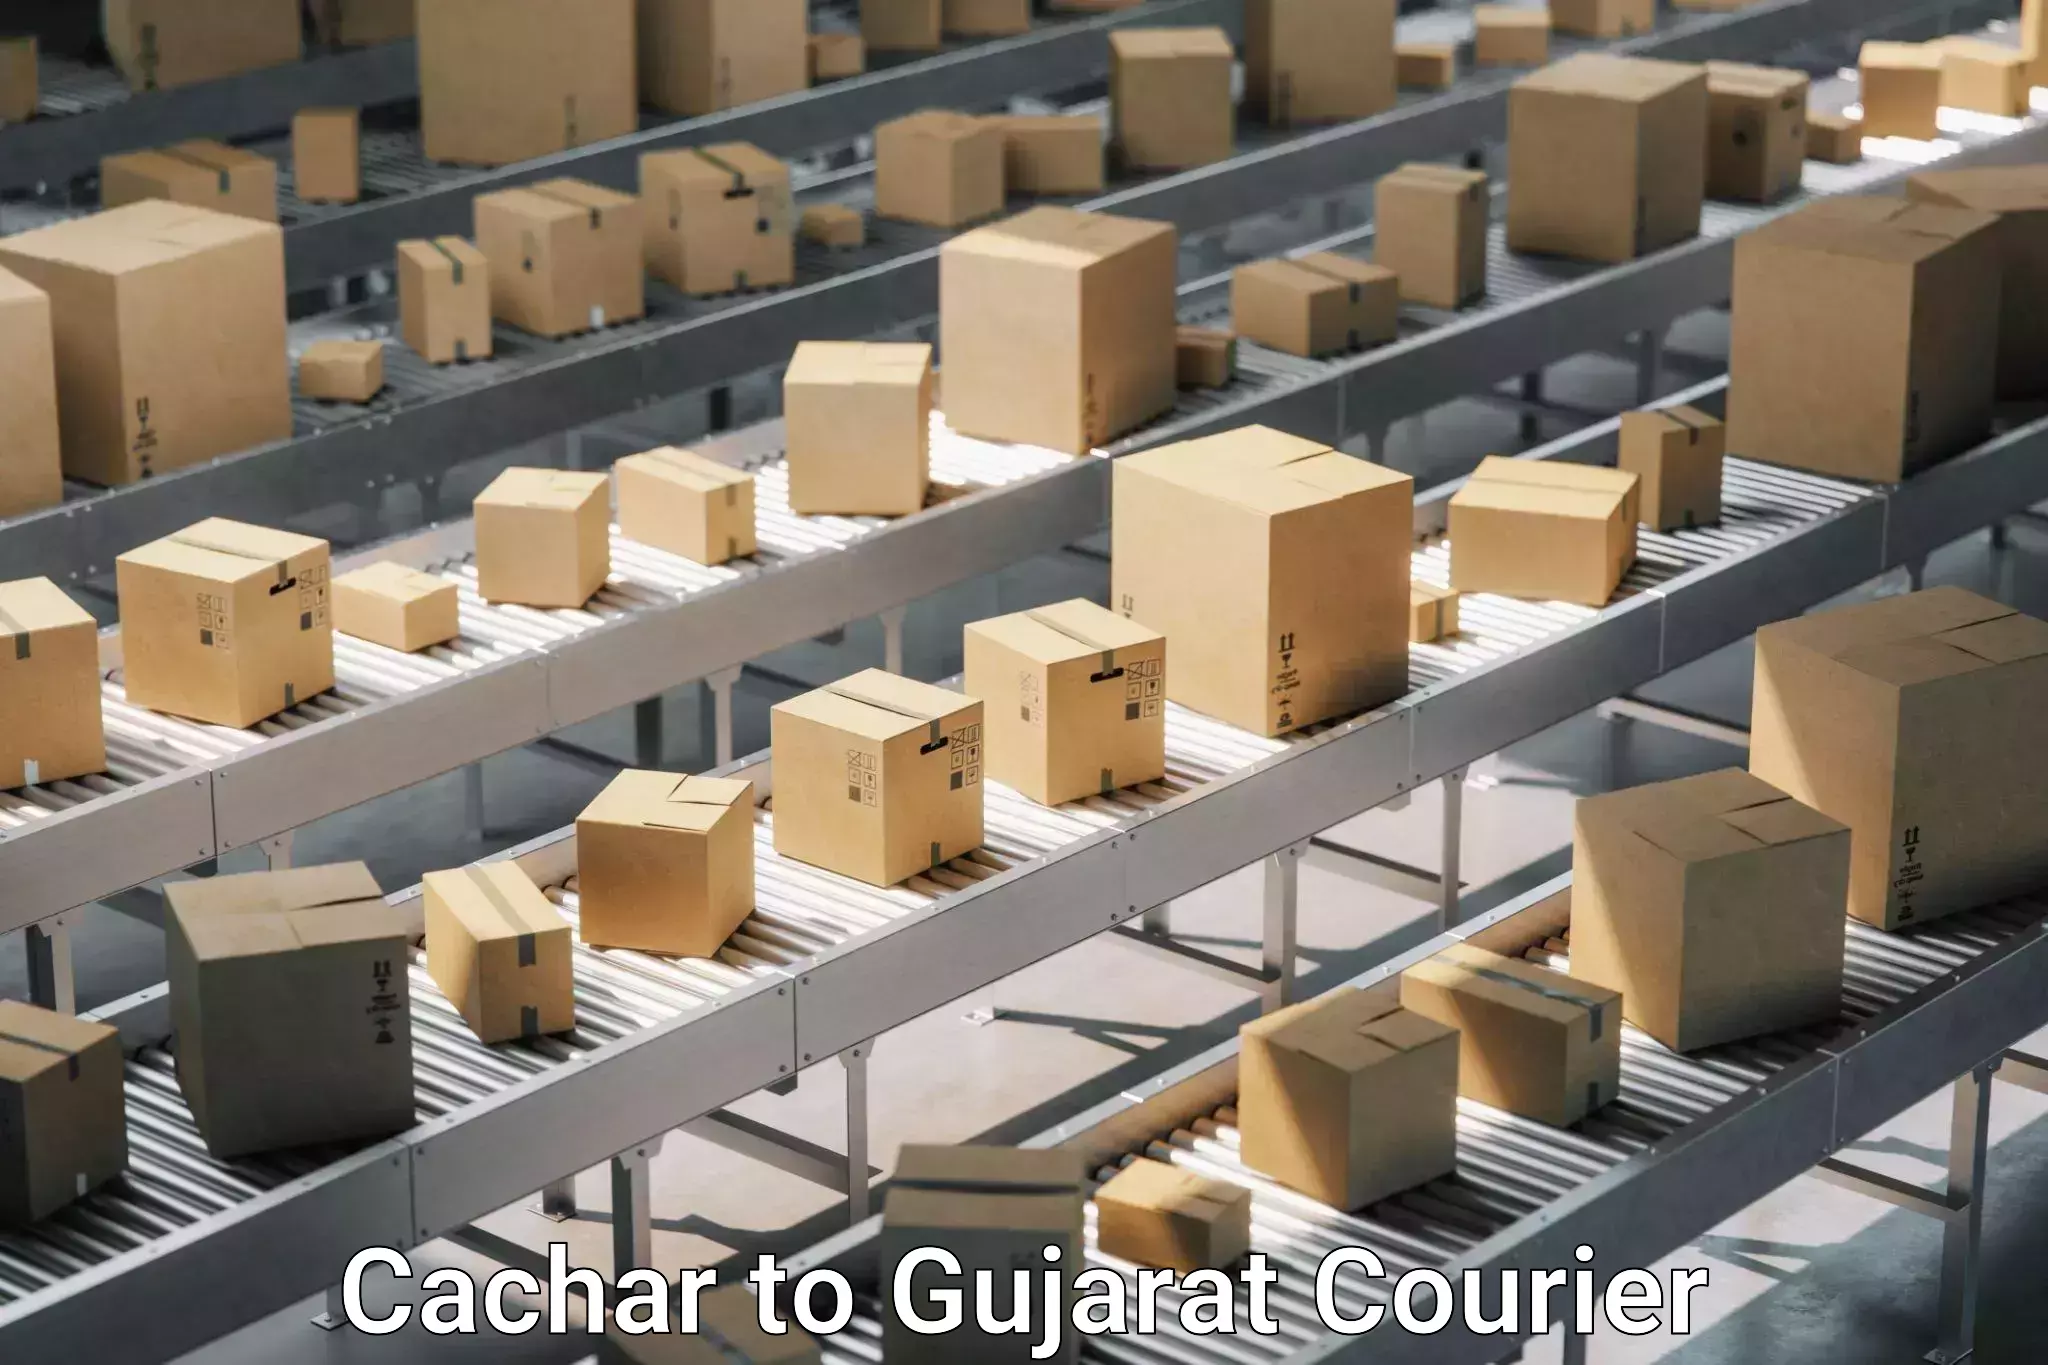 Home relocation experts Cachar to Gujarat